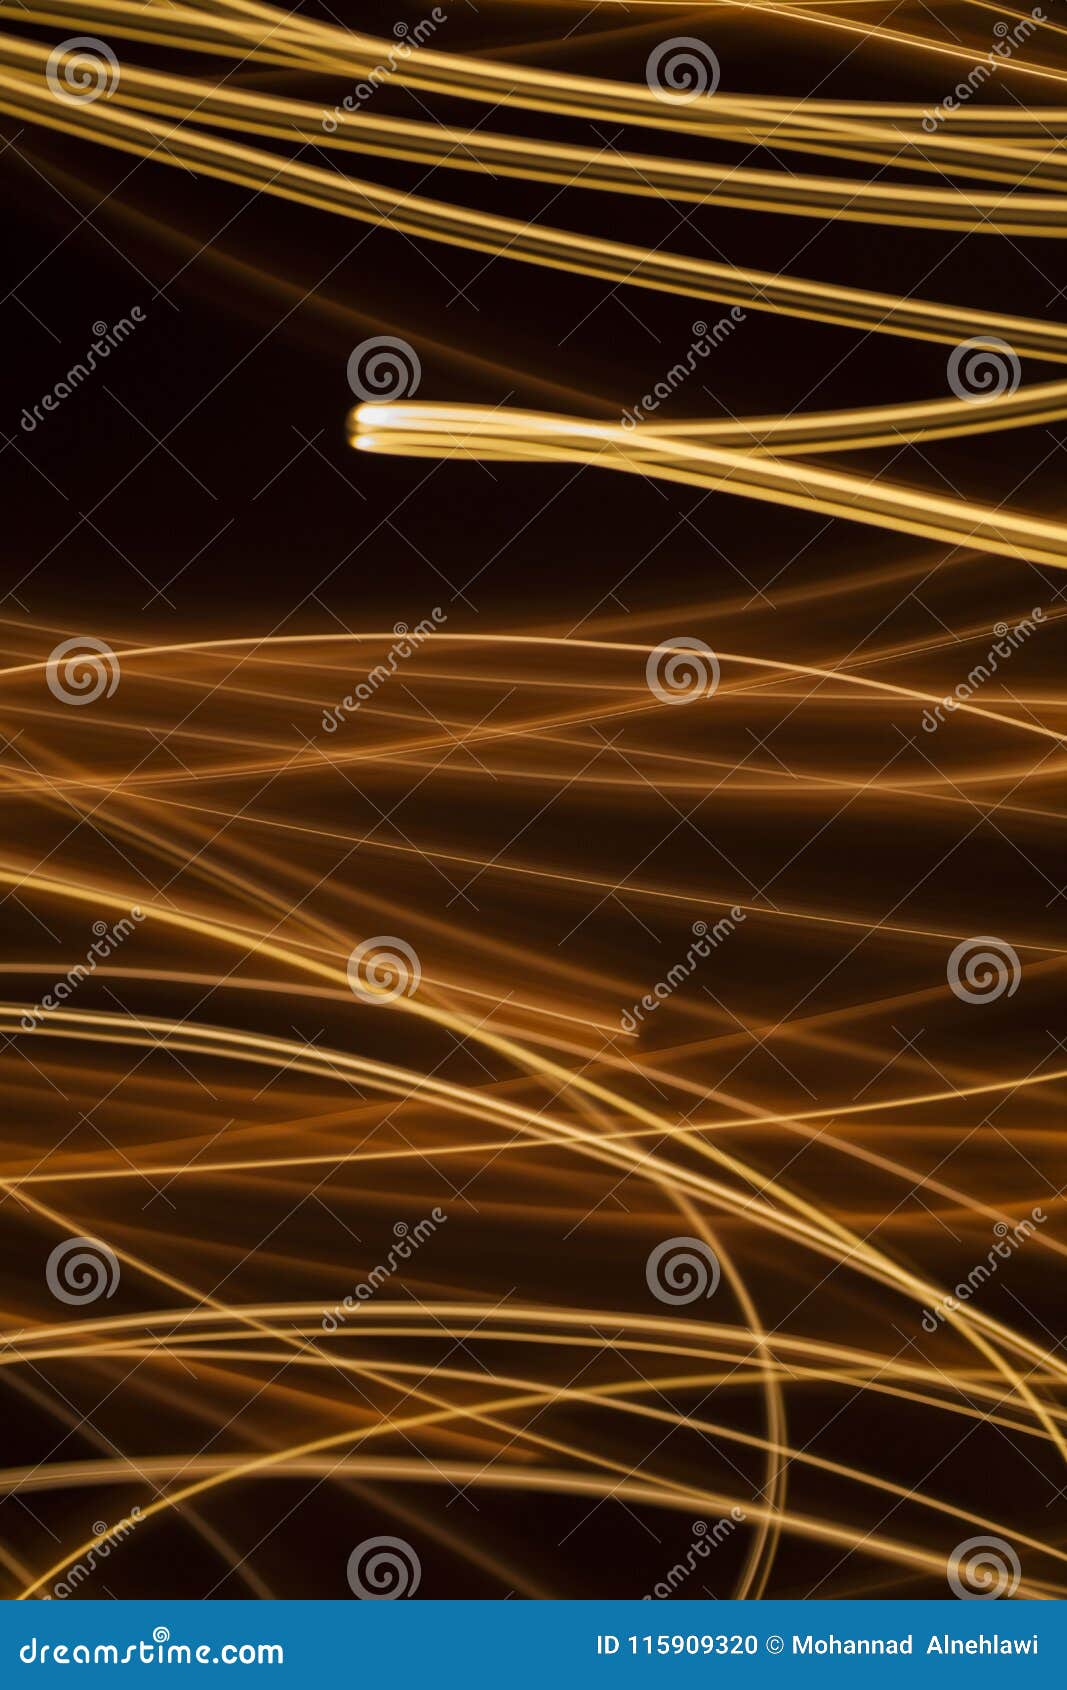 Swirl Sparkling Glowing Lines Background Stock Photo - Image of light ...